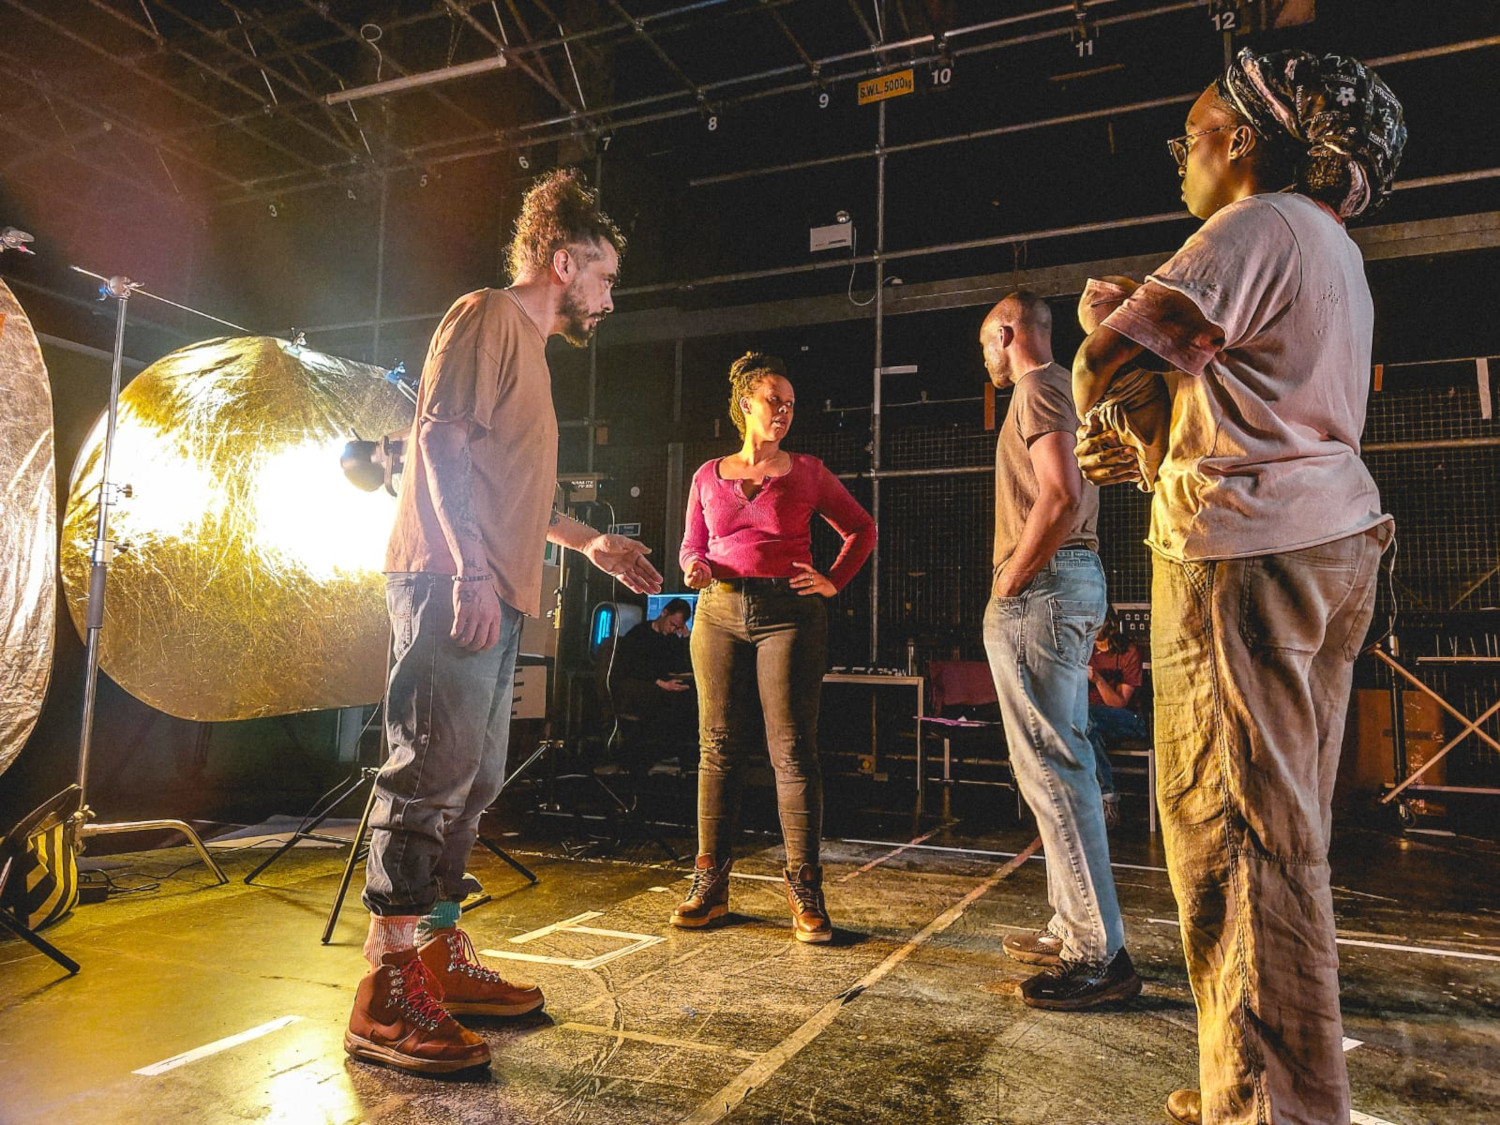 Four people standing in a circle. They are stood in a film production studio with a bright light behind them